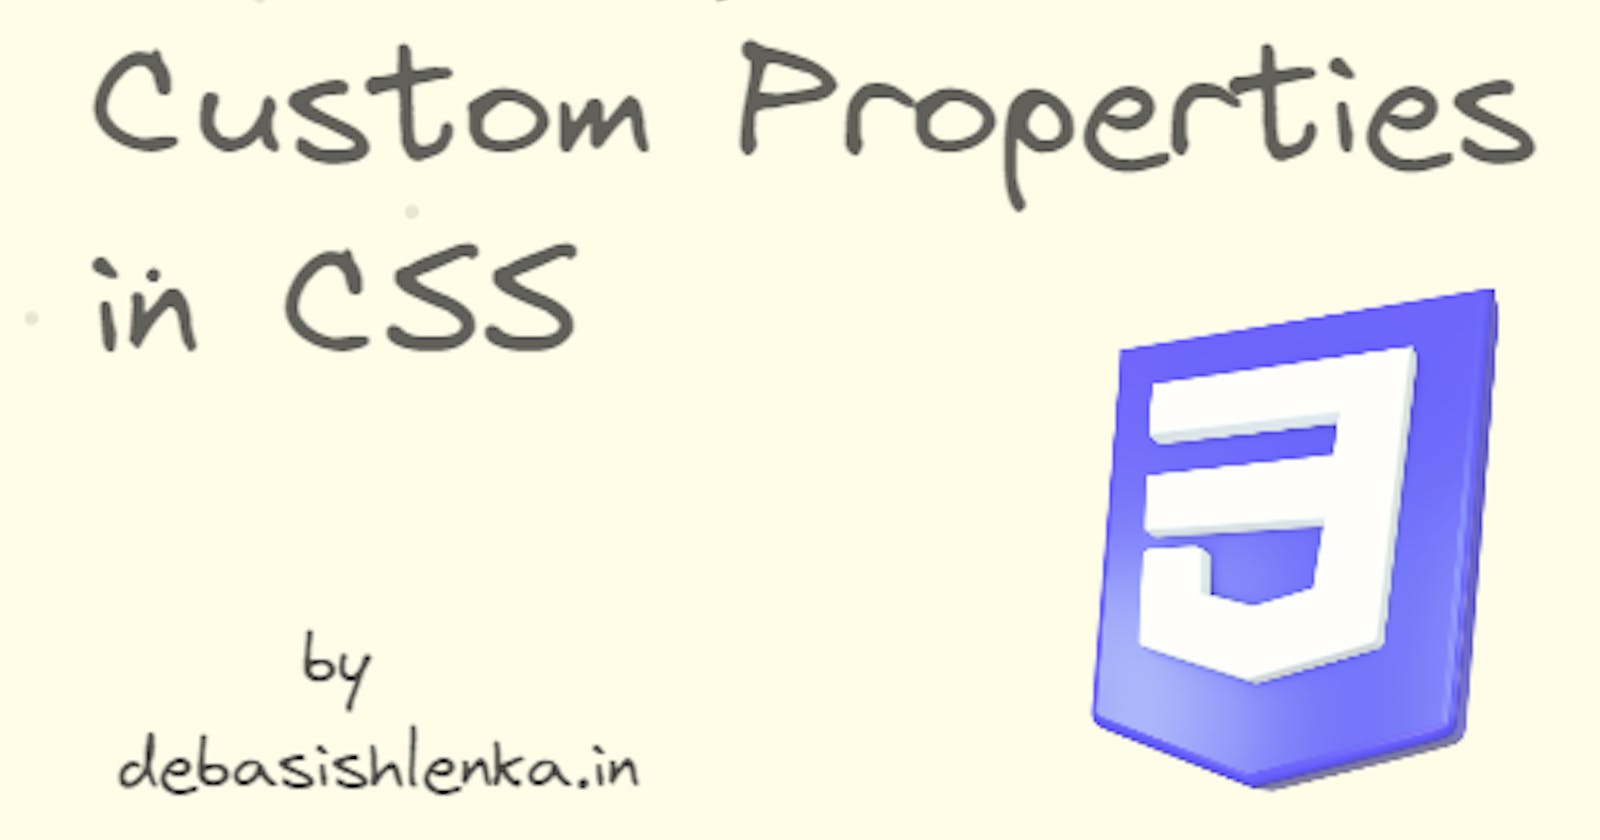 Custom Properties are Changing The Way We Style With CSS